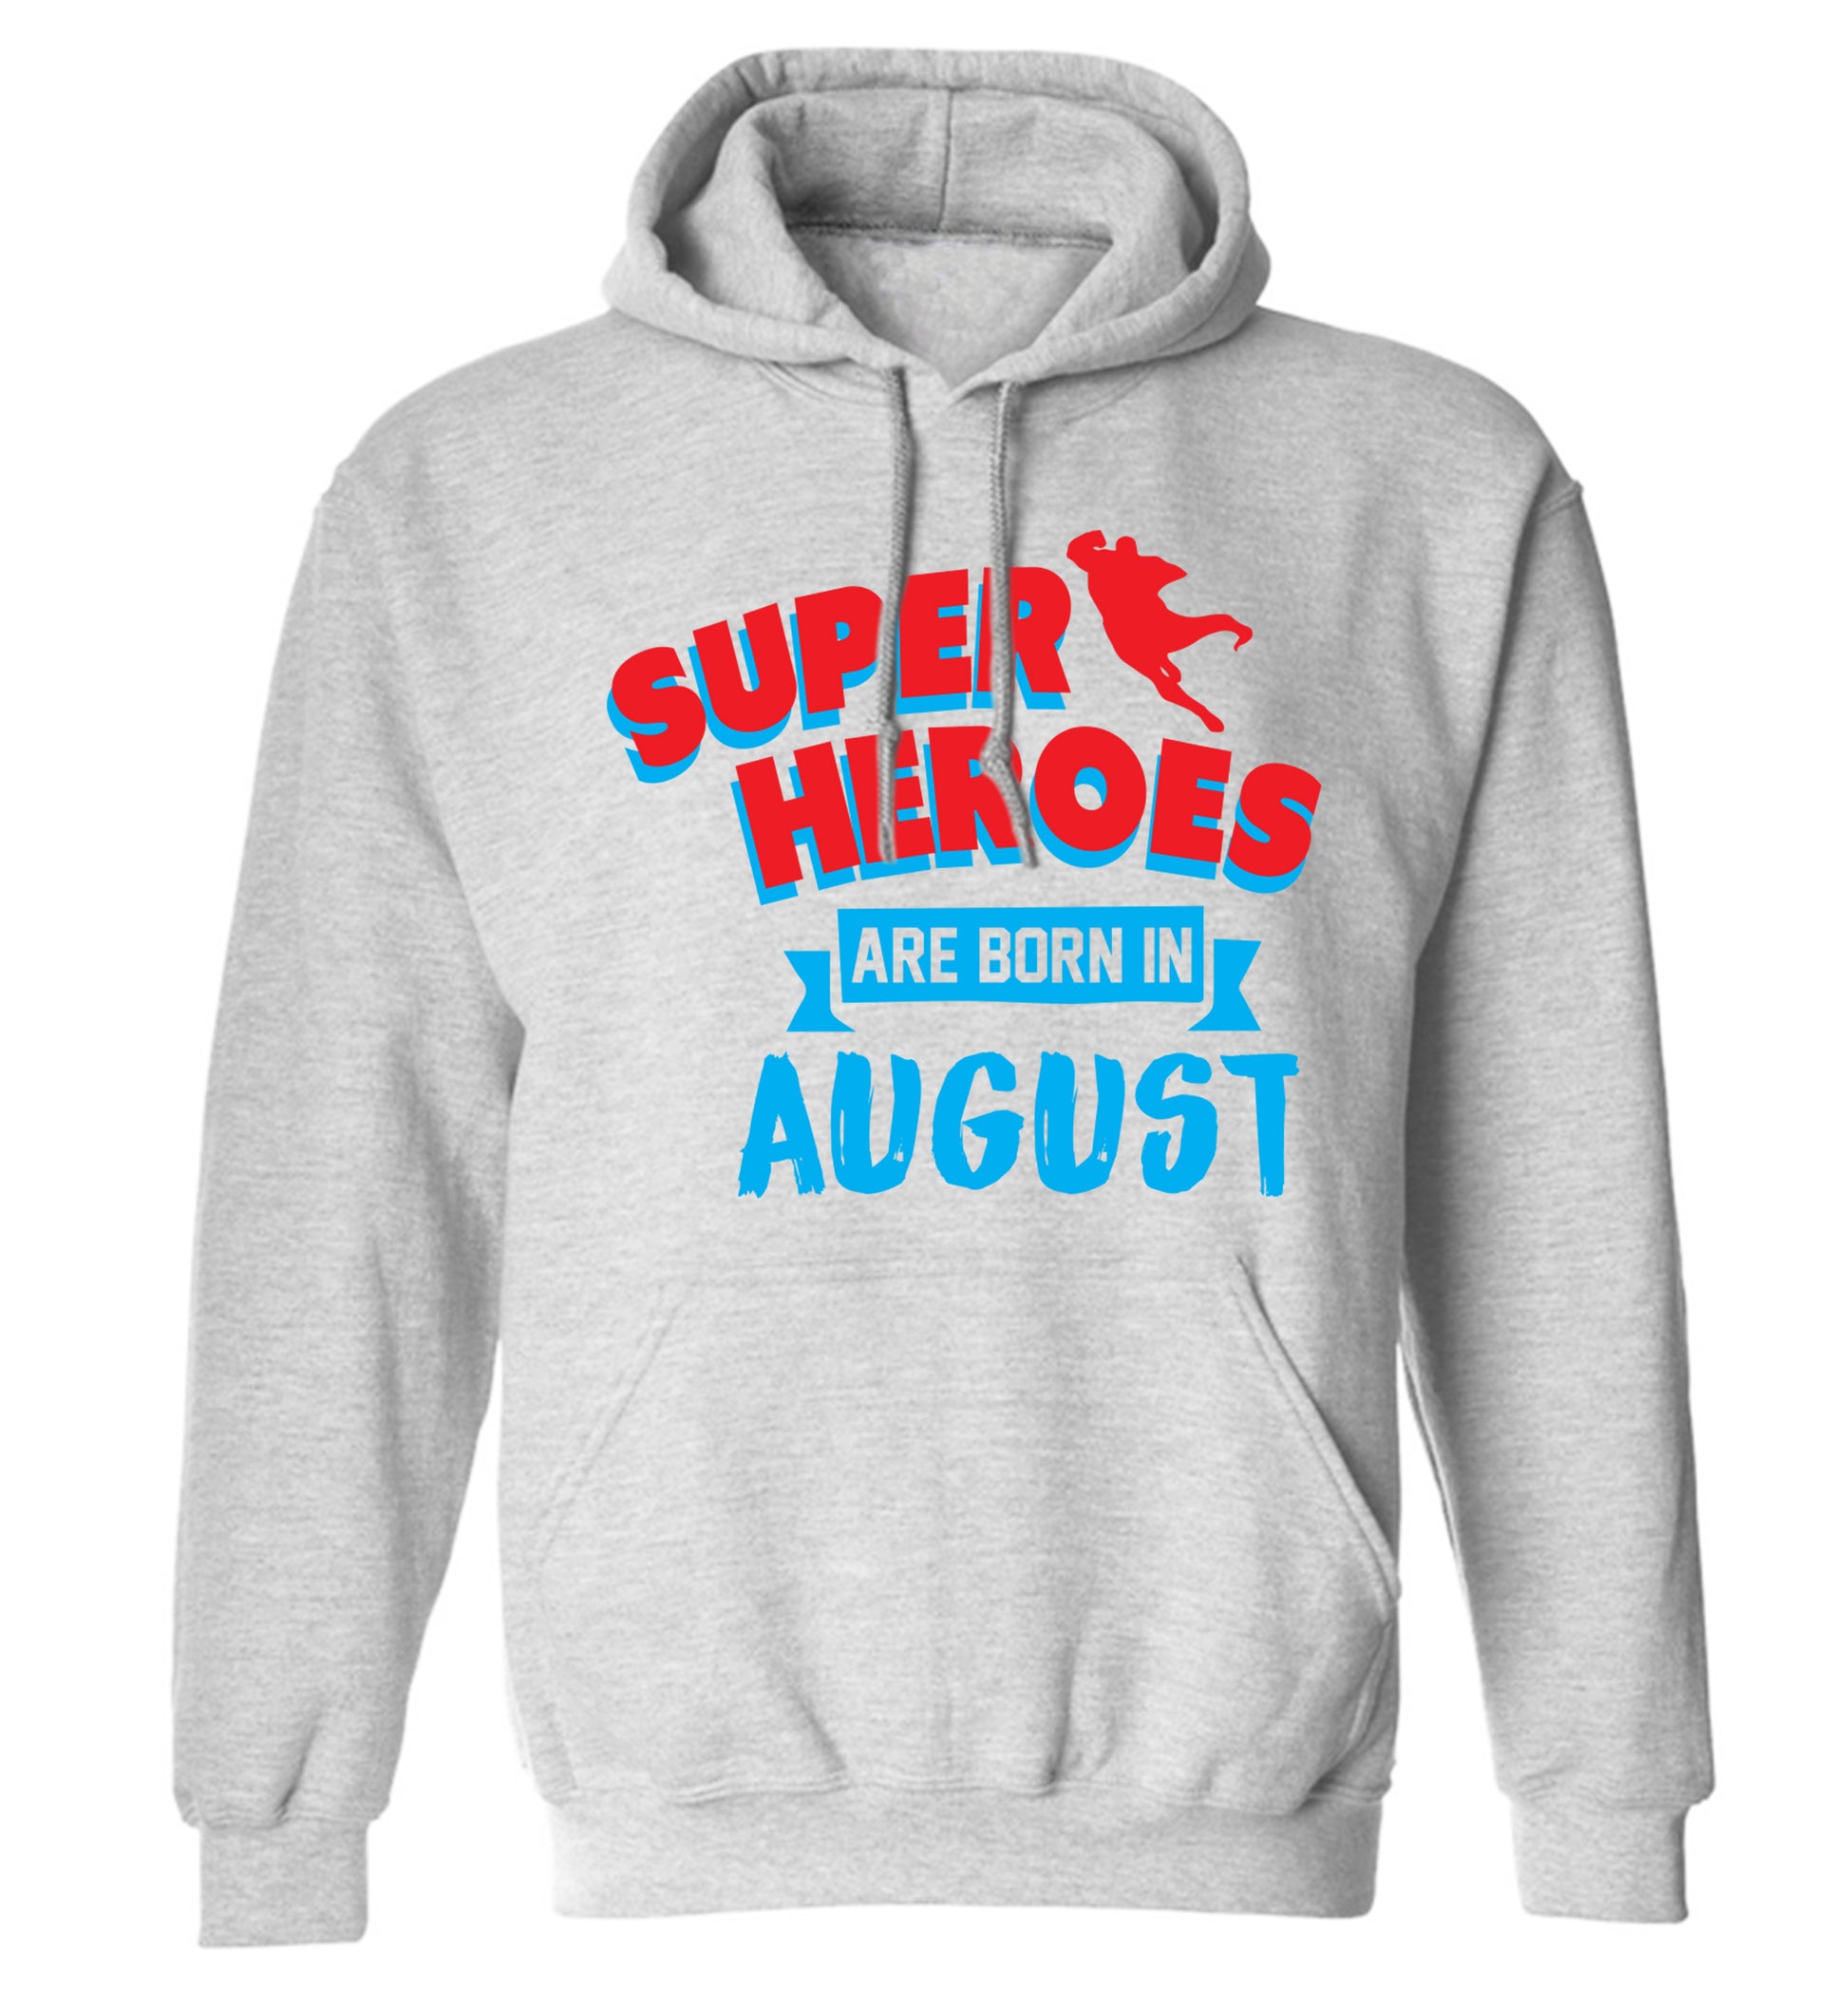 Superheroes are born in August adults unisex grey hoodie 2XL